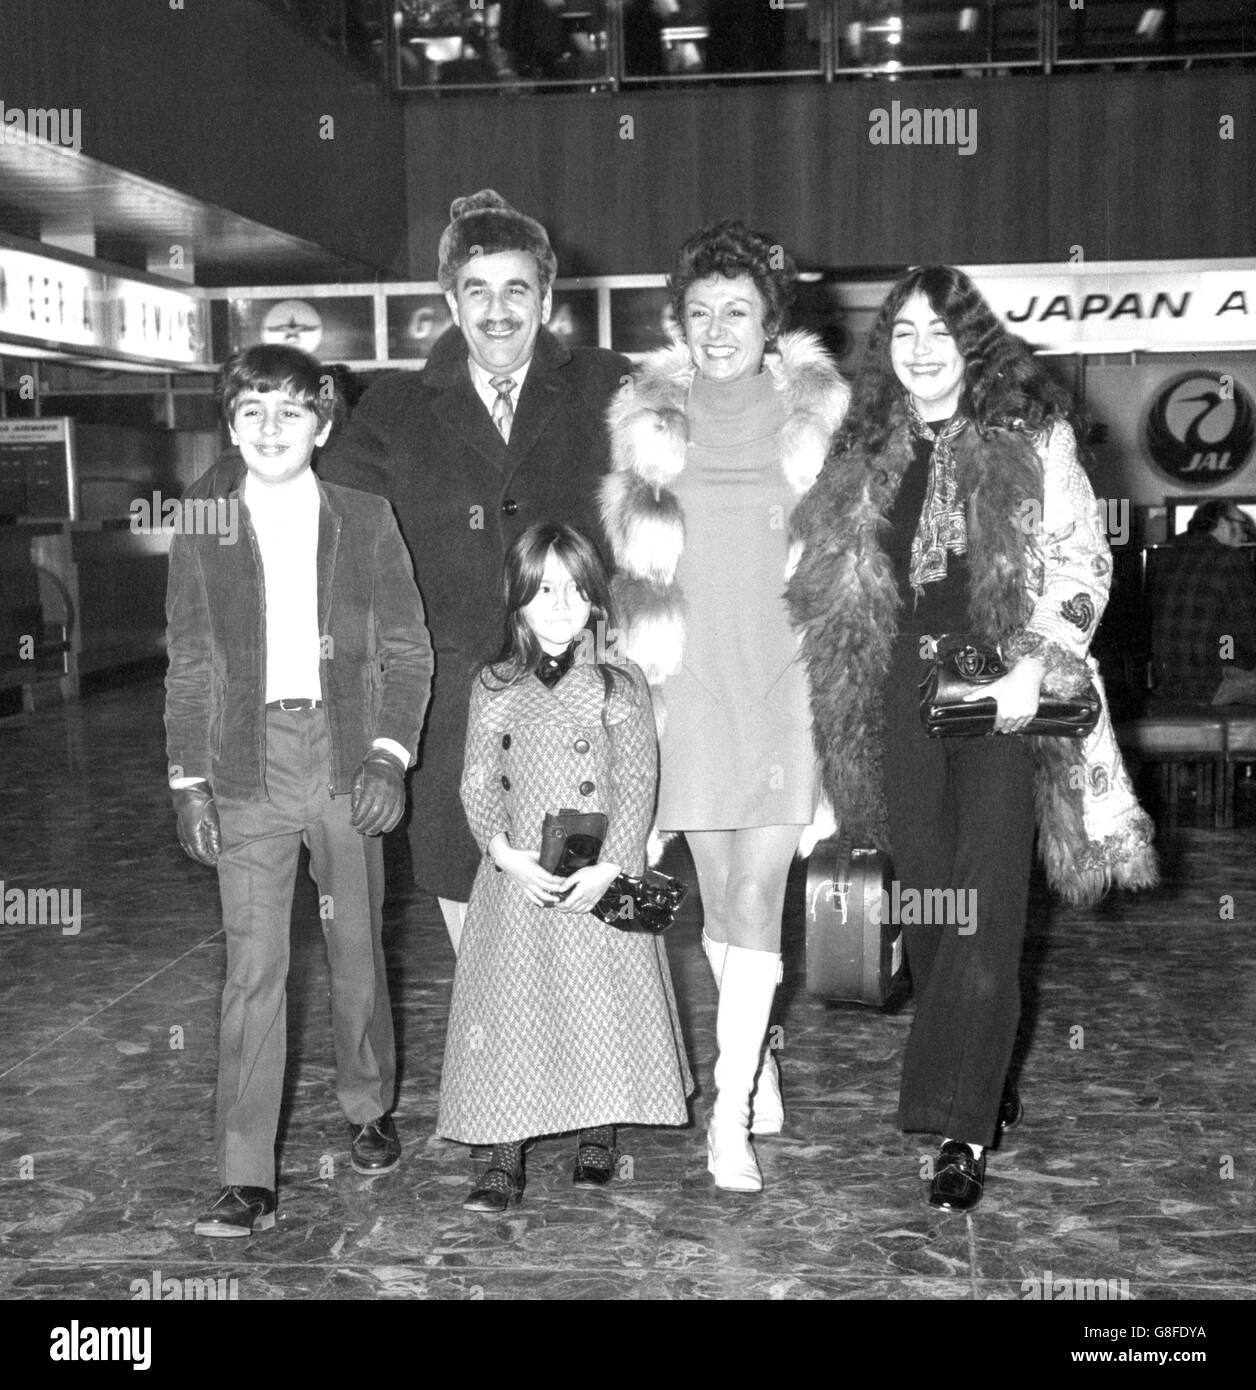 Off to spend Christmas in Fiji are actor Warren Mitchell, his wife Constance Wake, and their three children Rebecca, 14, Daniel, 12, and Anna, 6. They were flying from Heathrow Airport, London. After Fiji, Mr Mitchell, who was TV's Alf Garnett, will go to Australia to play the top spot in cabaret at the Hilton Hotel in Melbourne. Stock Photo